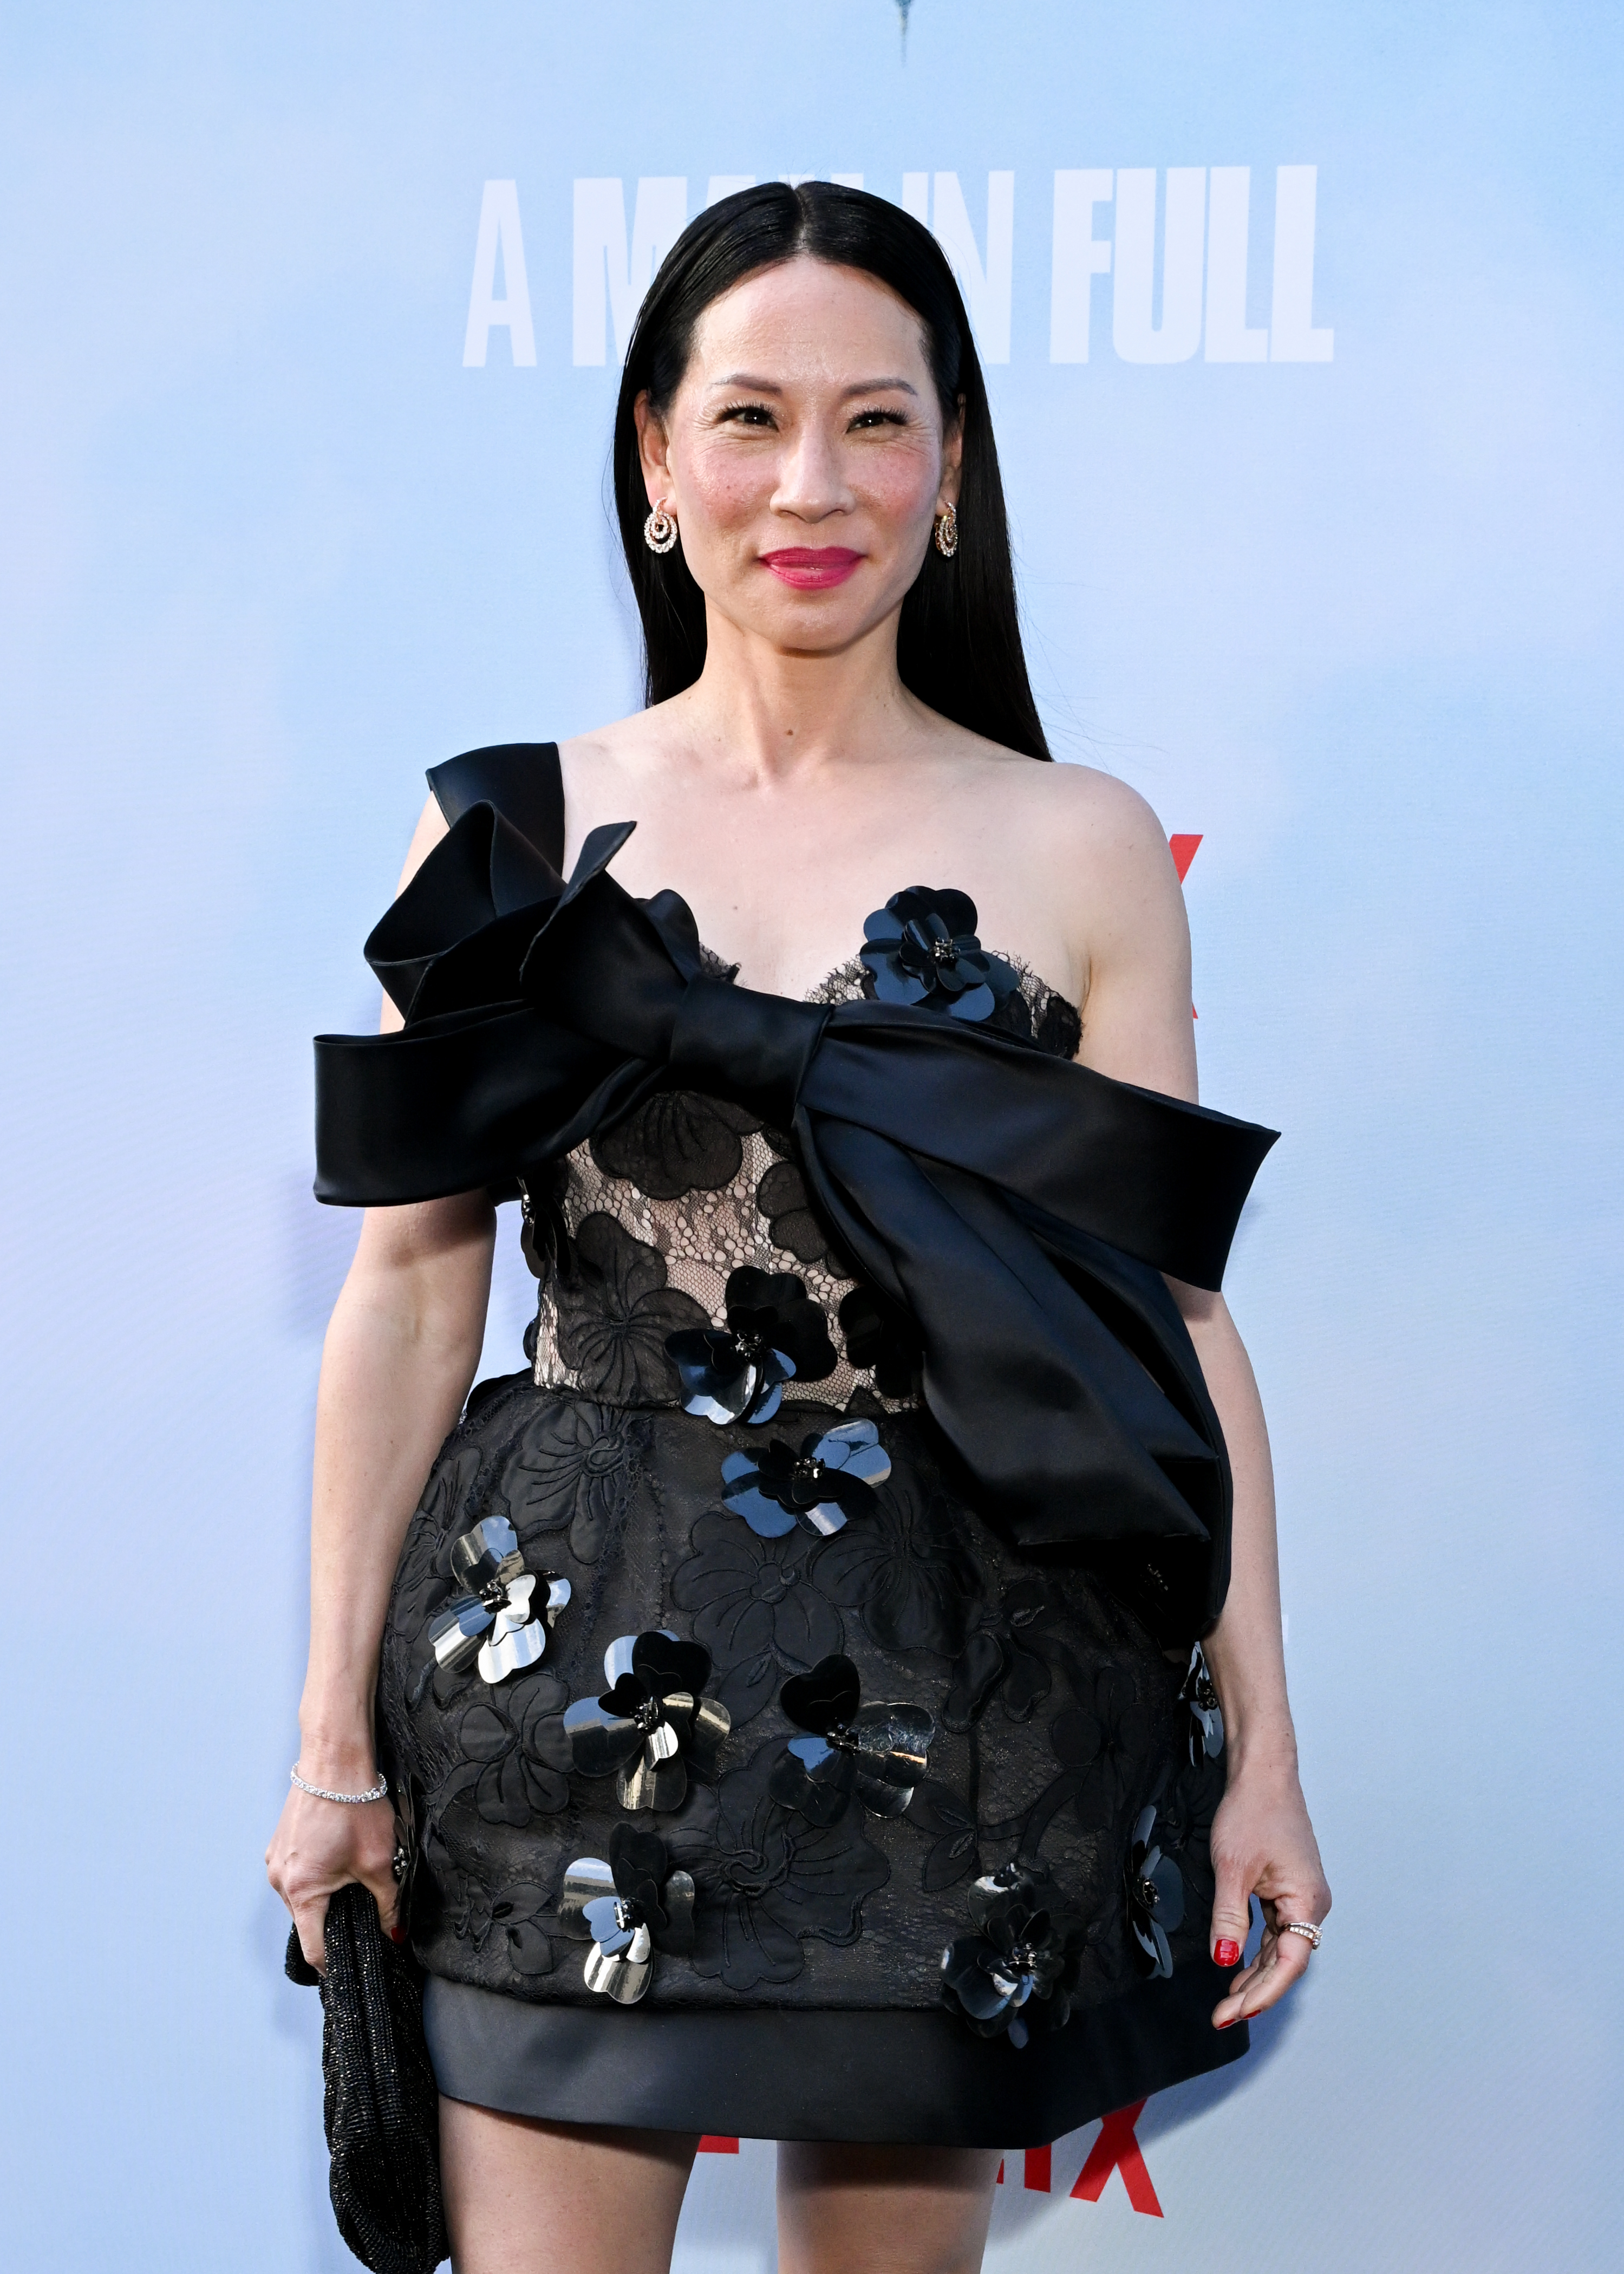 Lucy Liu in a black lace dress with large bow and floral details poses on event backdrop